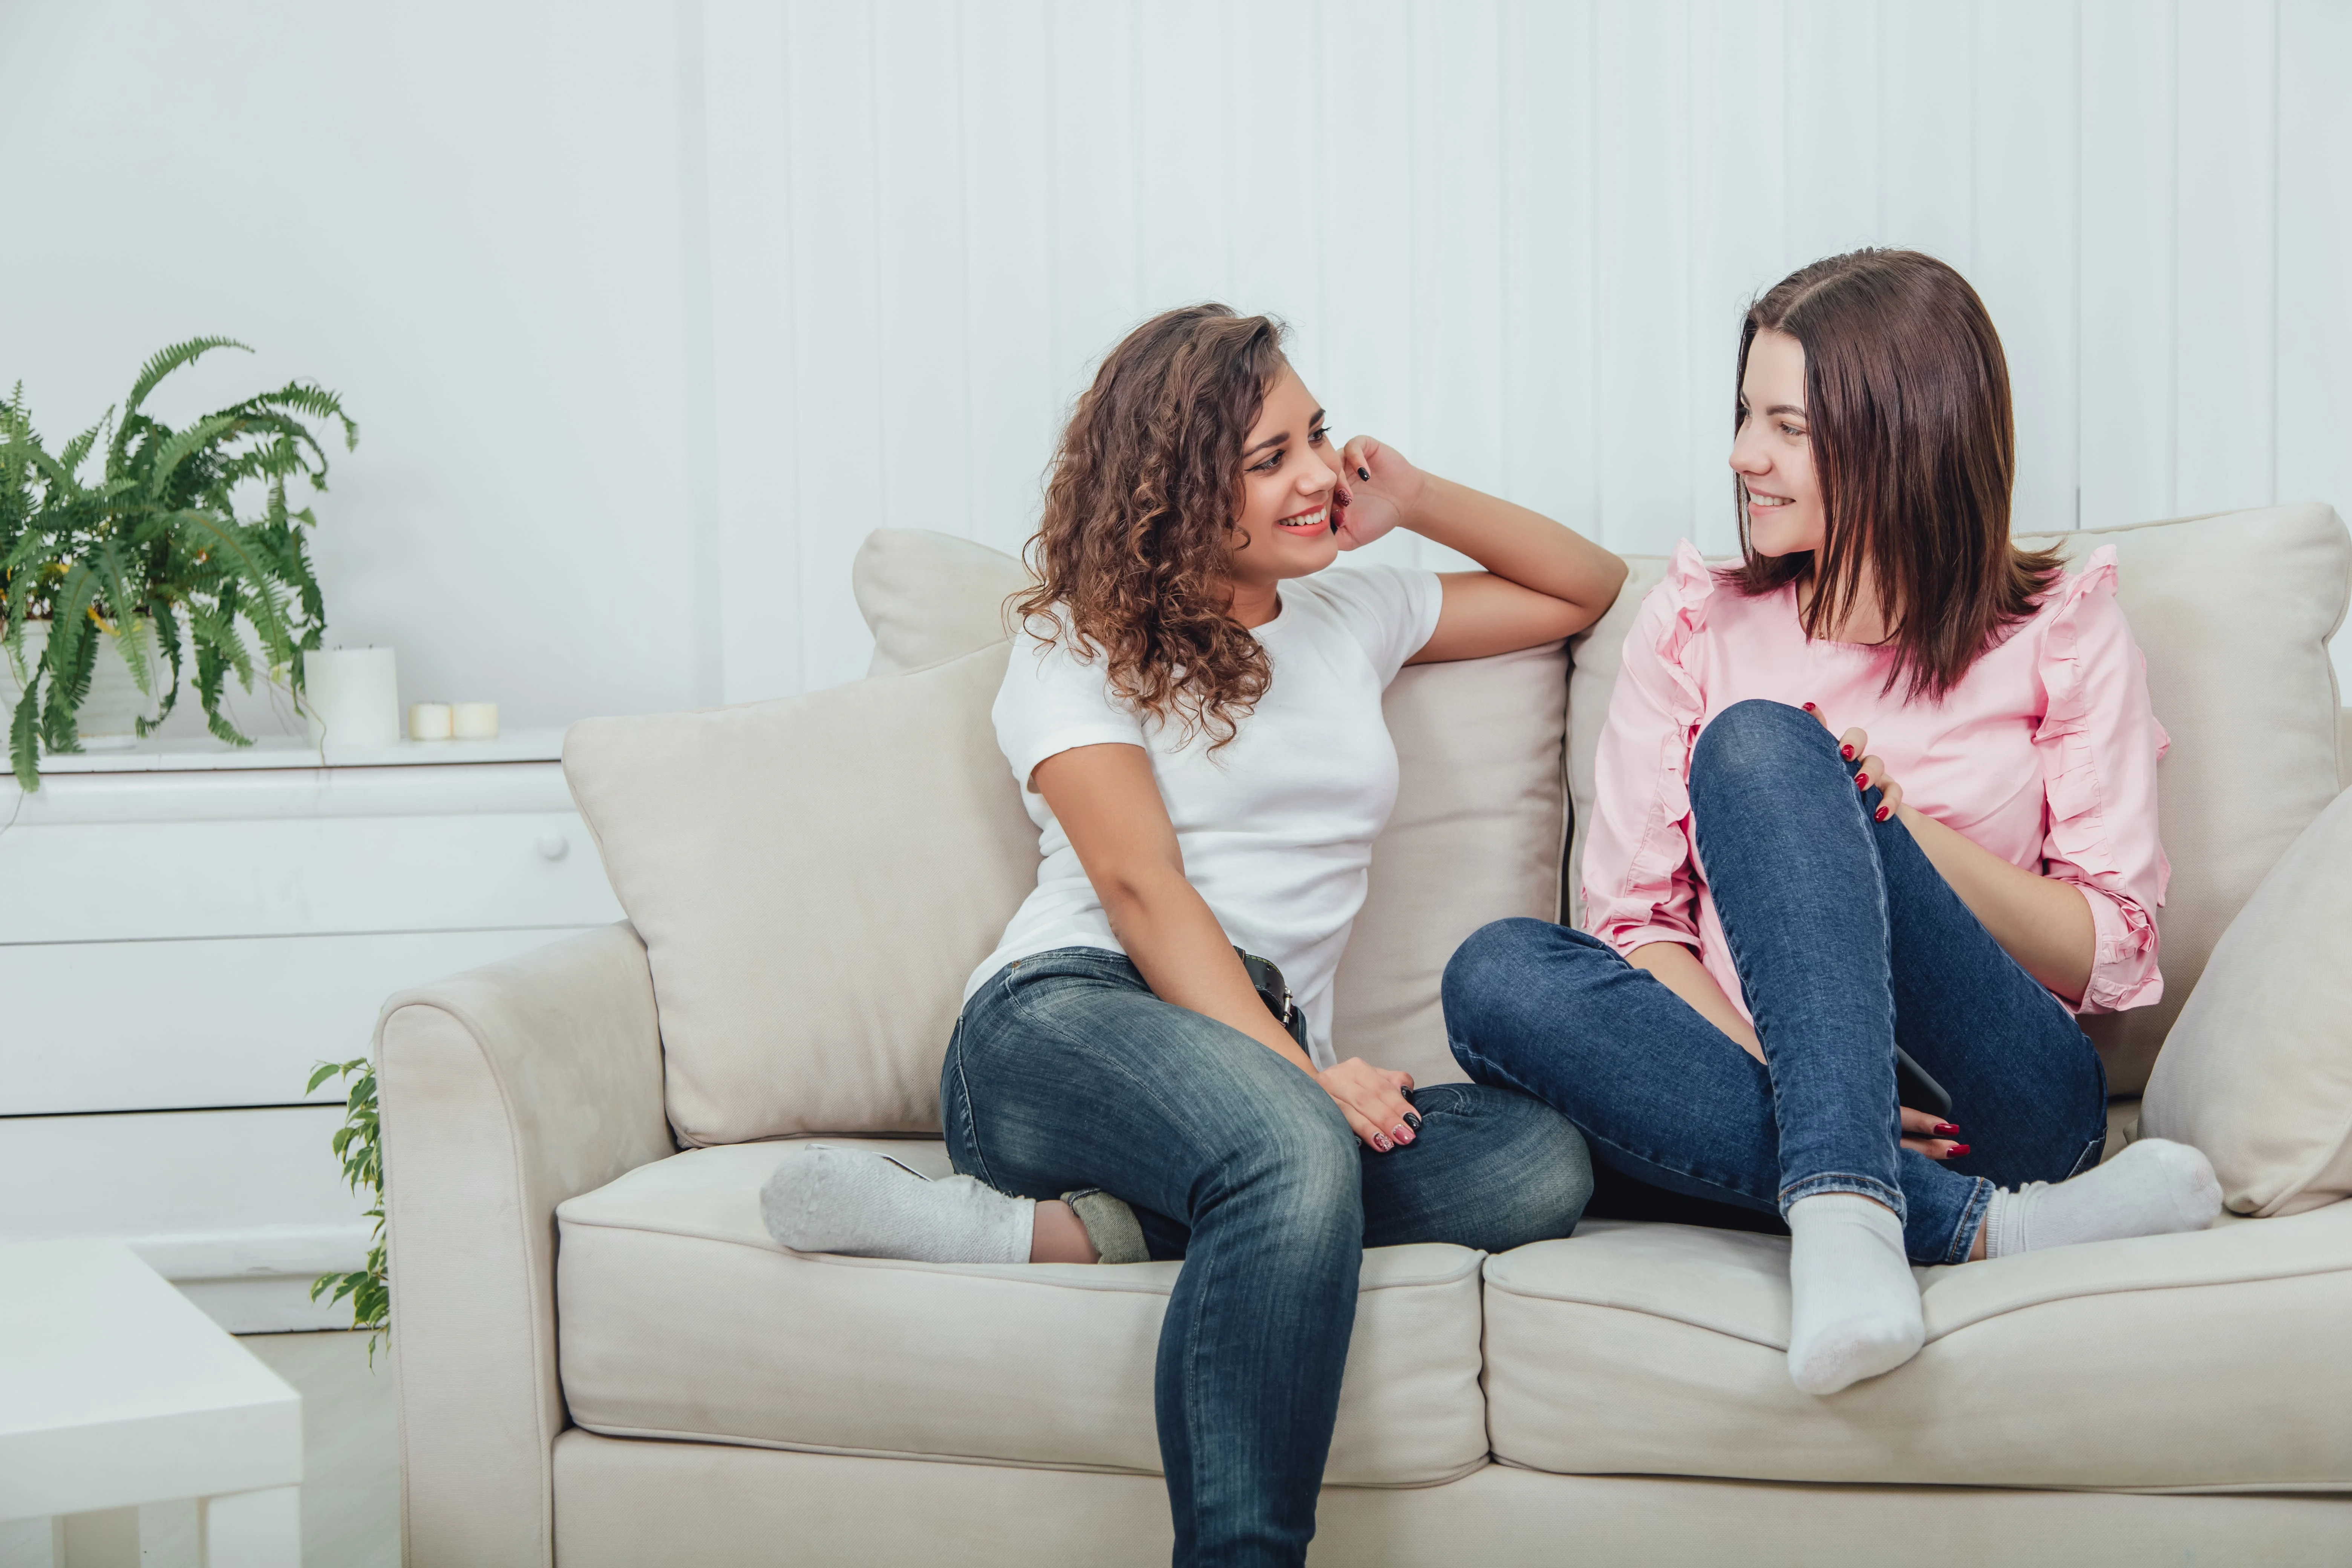 Two girls talking while sitting on a couch